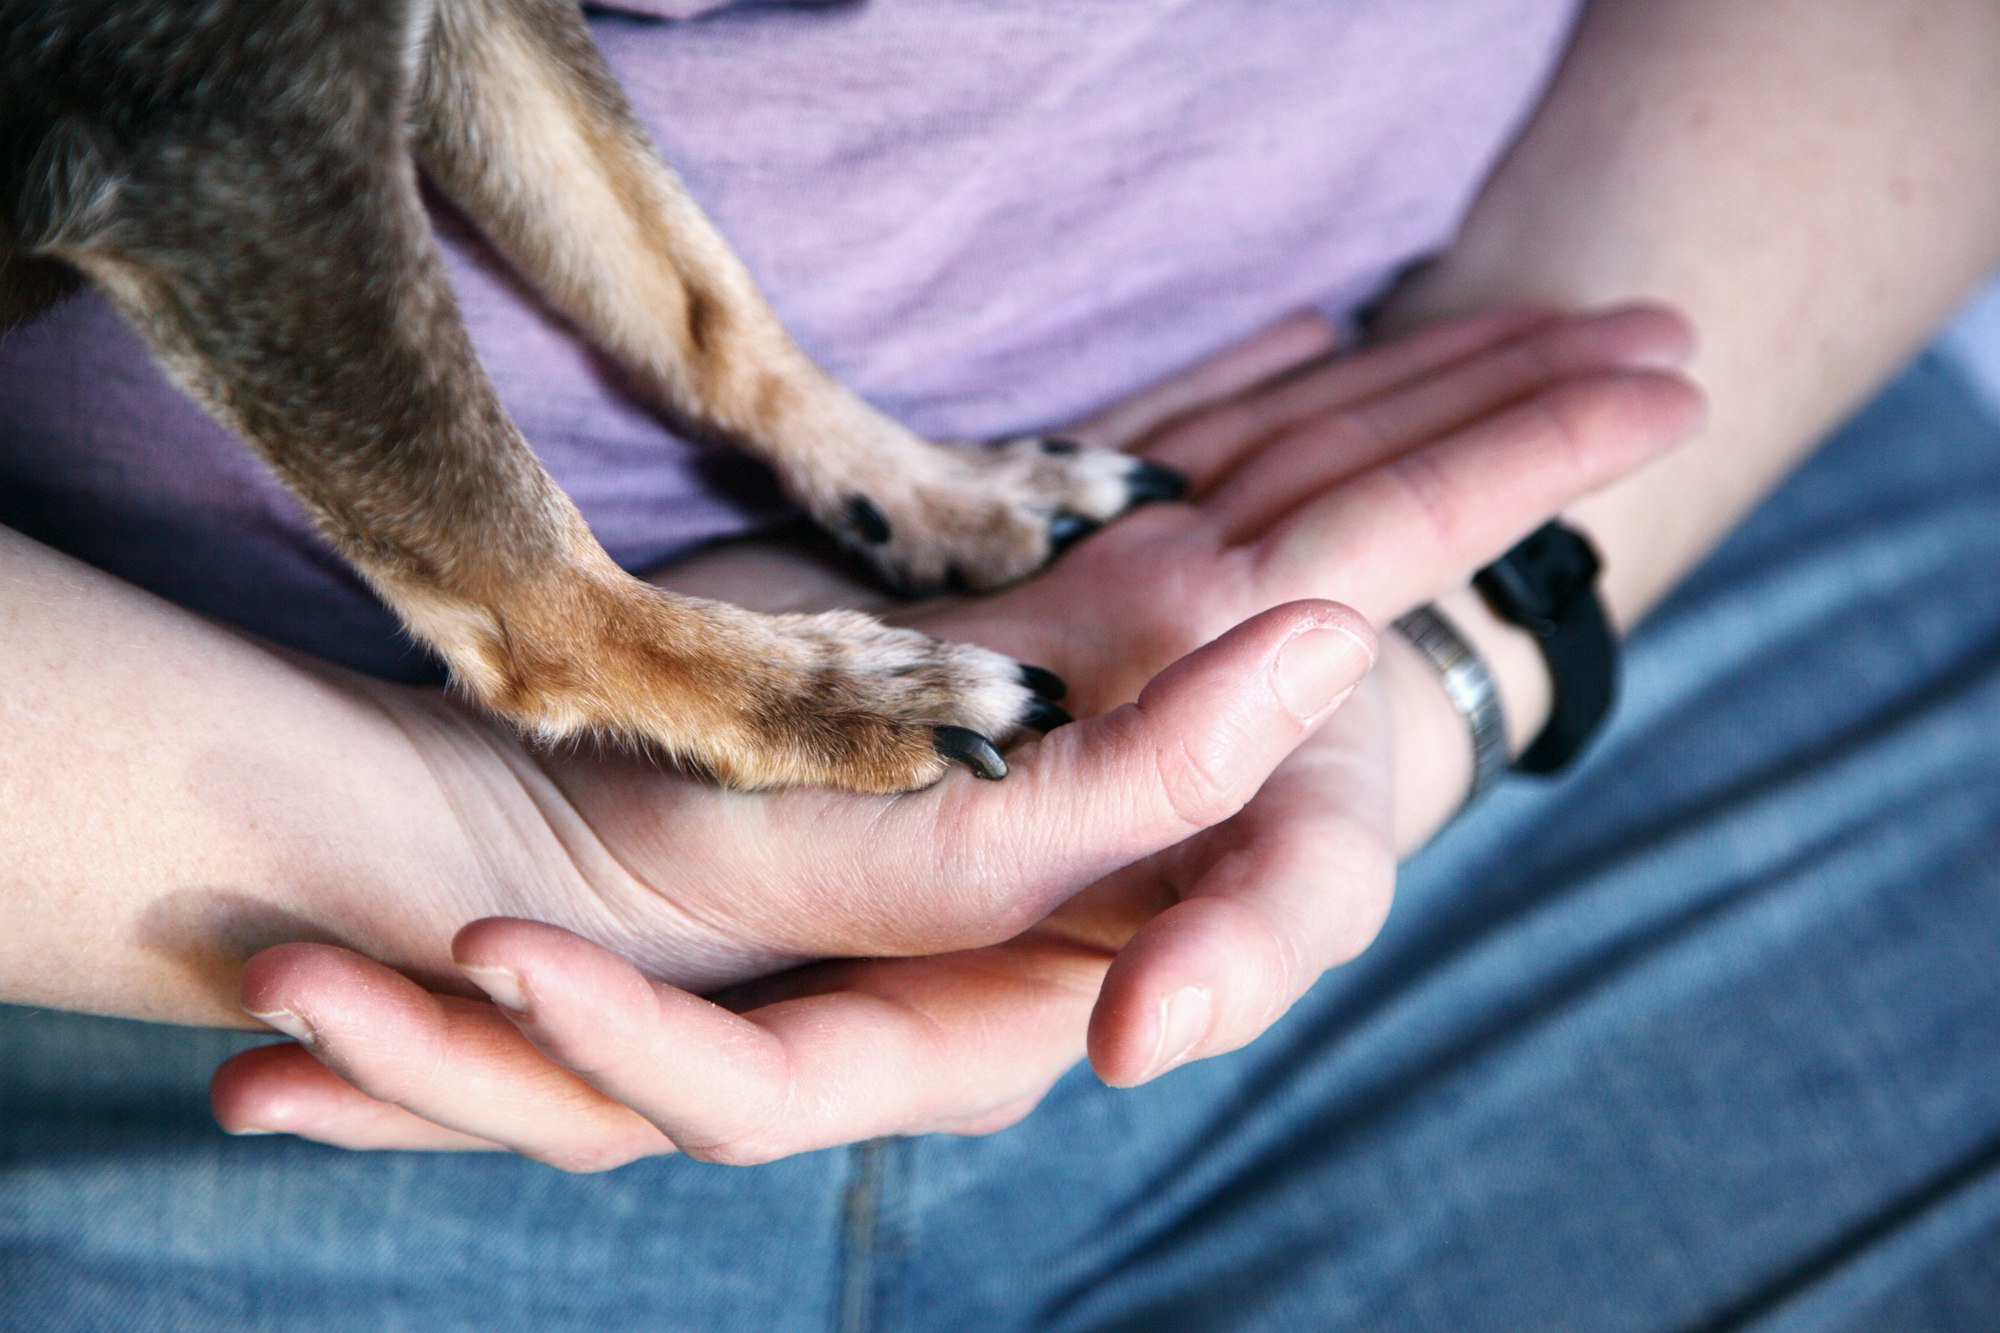 Shane holding our dog. Close up of hands and paws.